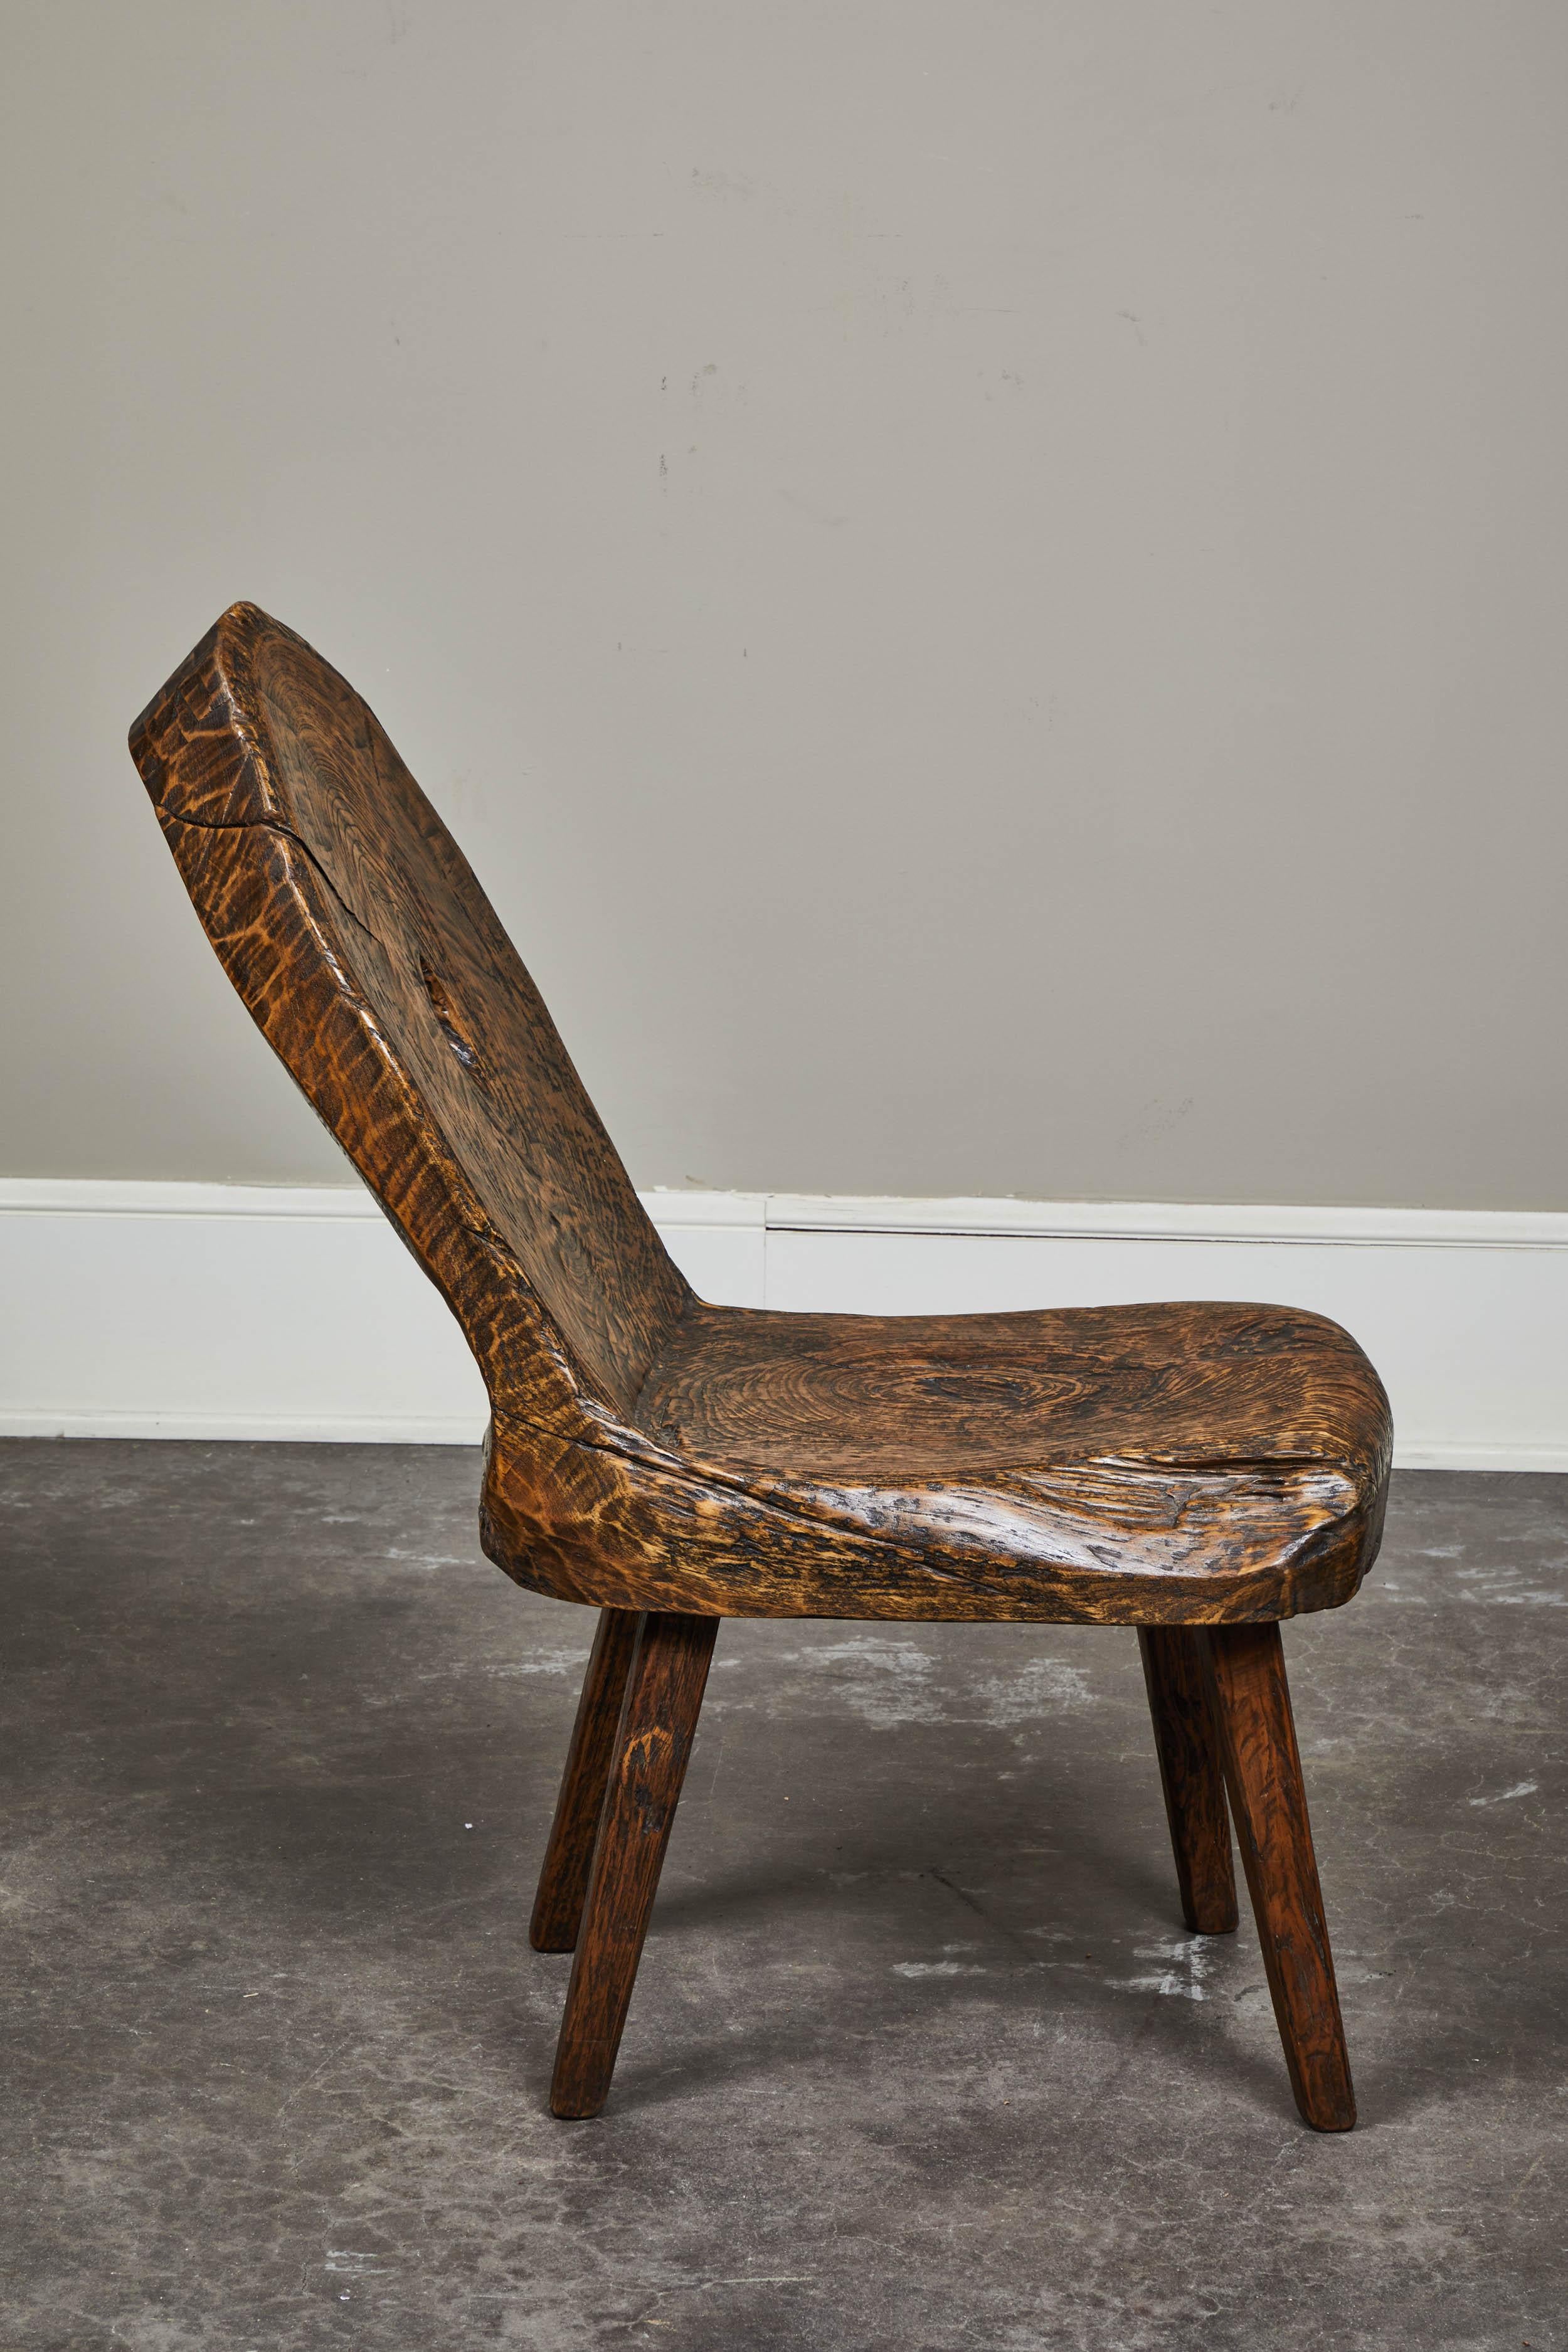 Teak Early 20th Century Indonesian Village Chair For Sale